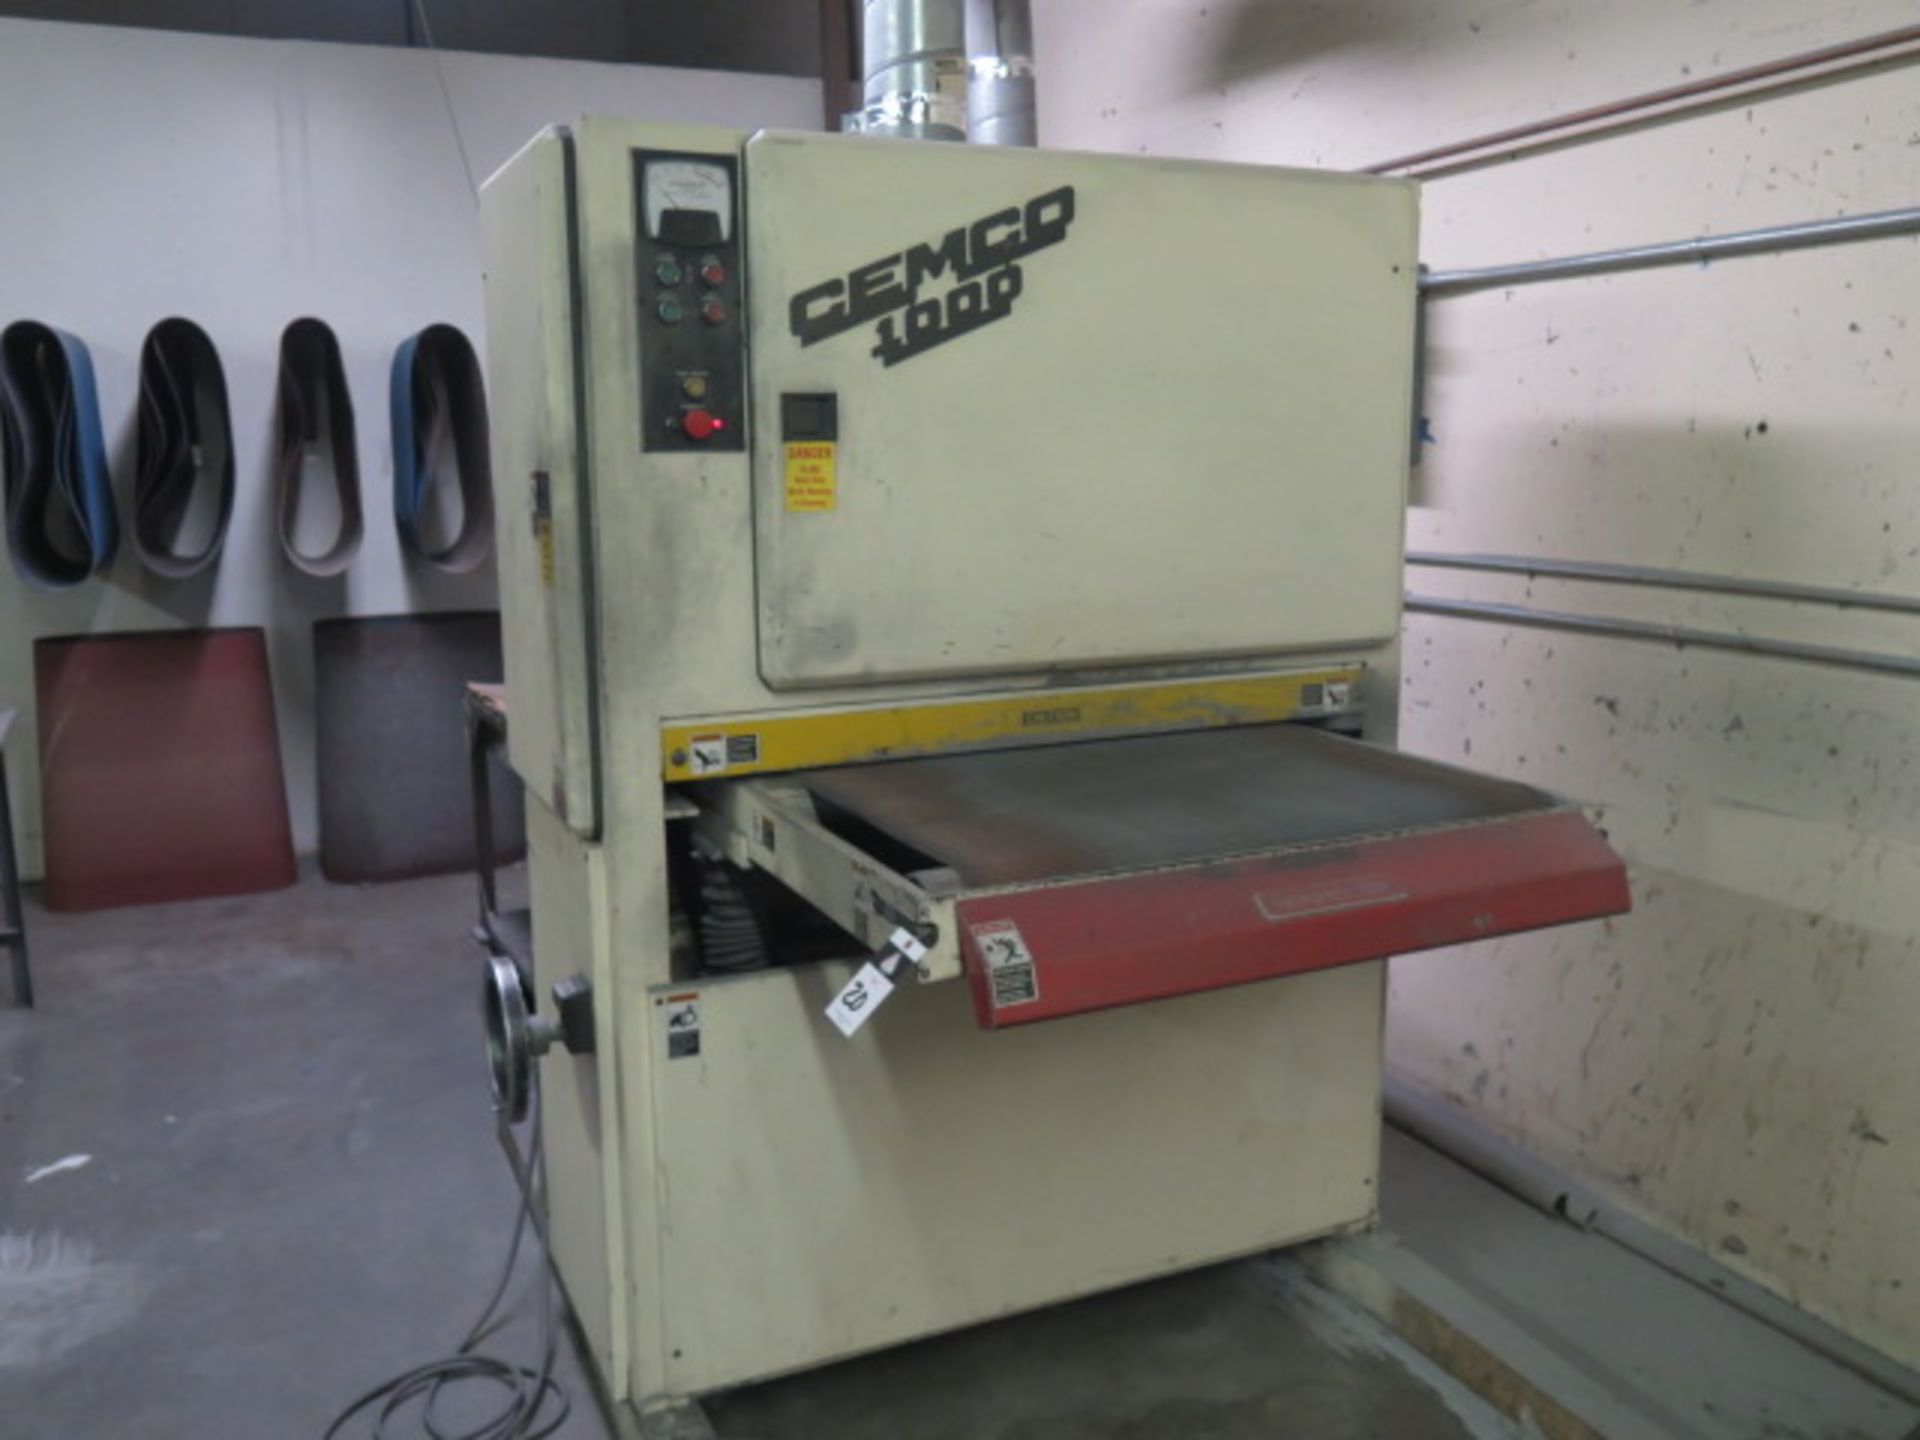 Cemco 1000 mdl. UR-1137SEMD 36" Belt Grainer s/n JR-1177-1 w/ Rand Bright dust collector, SOLD AS IS